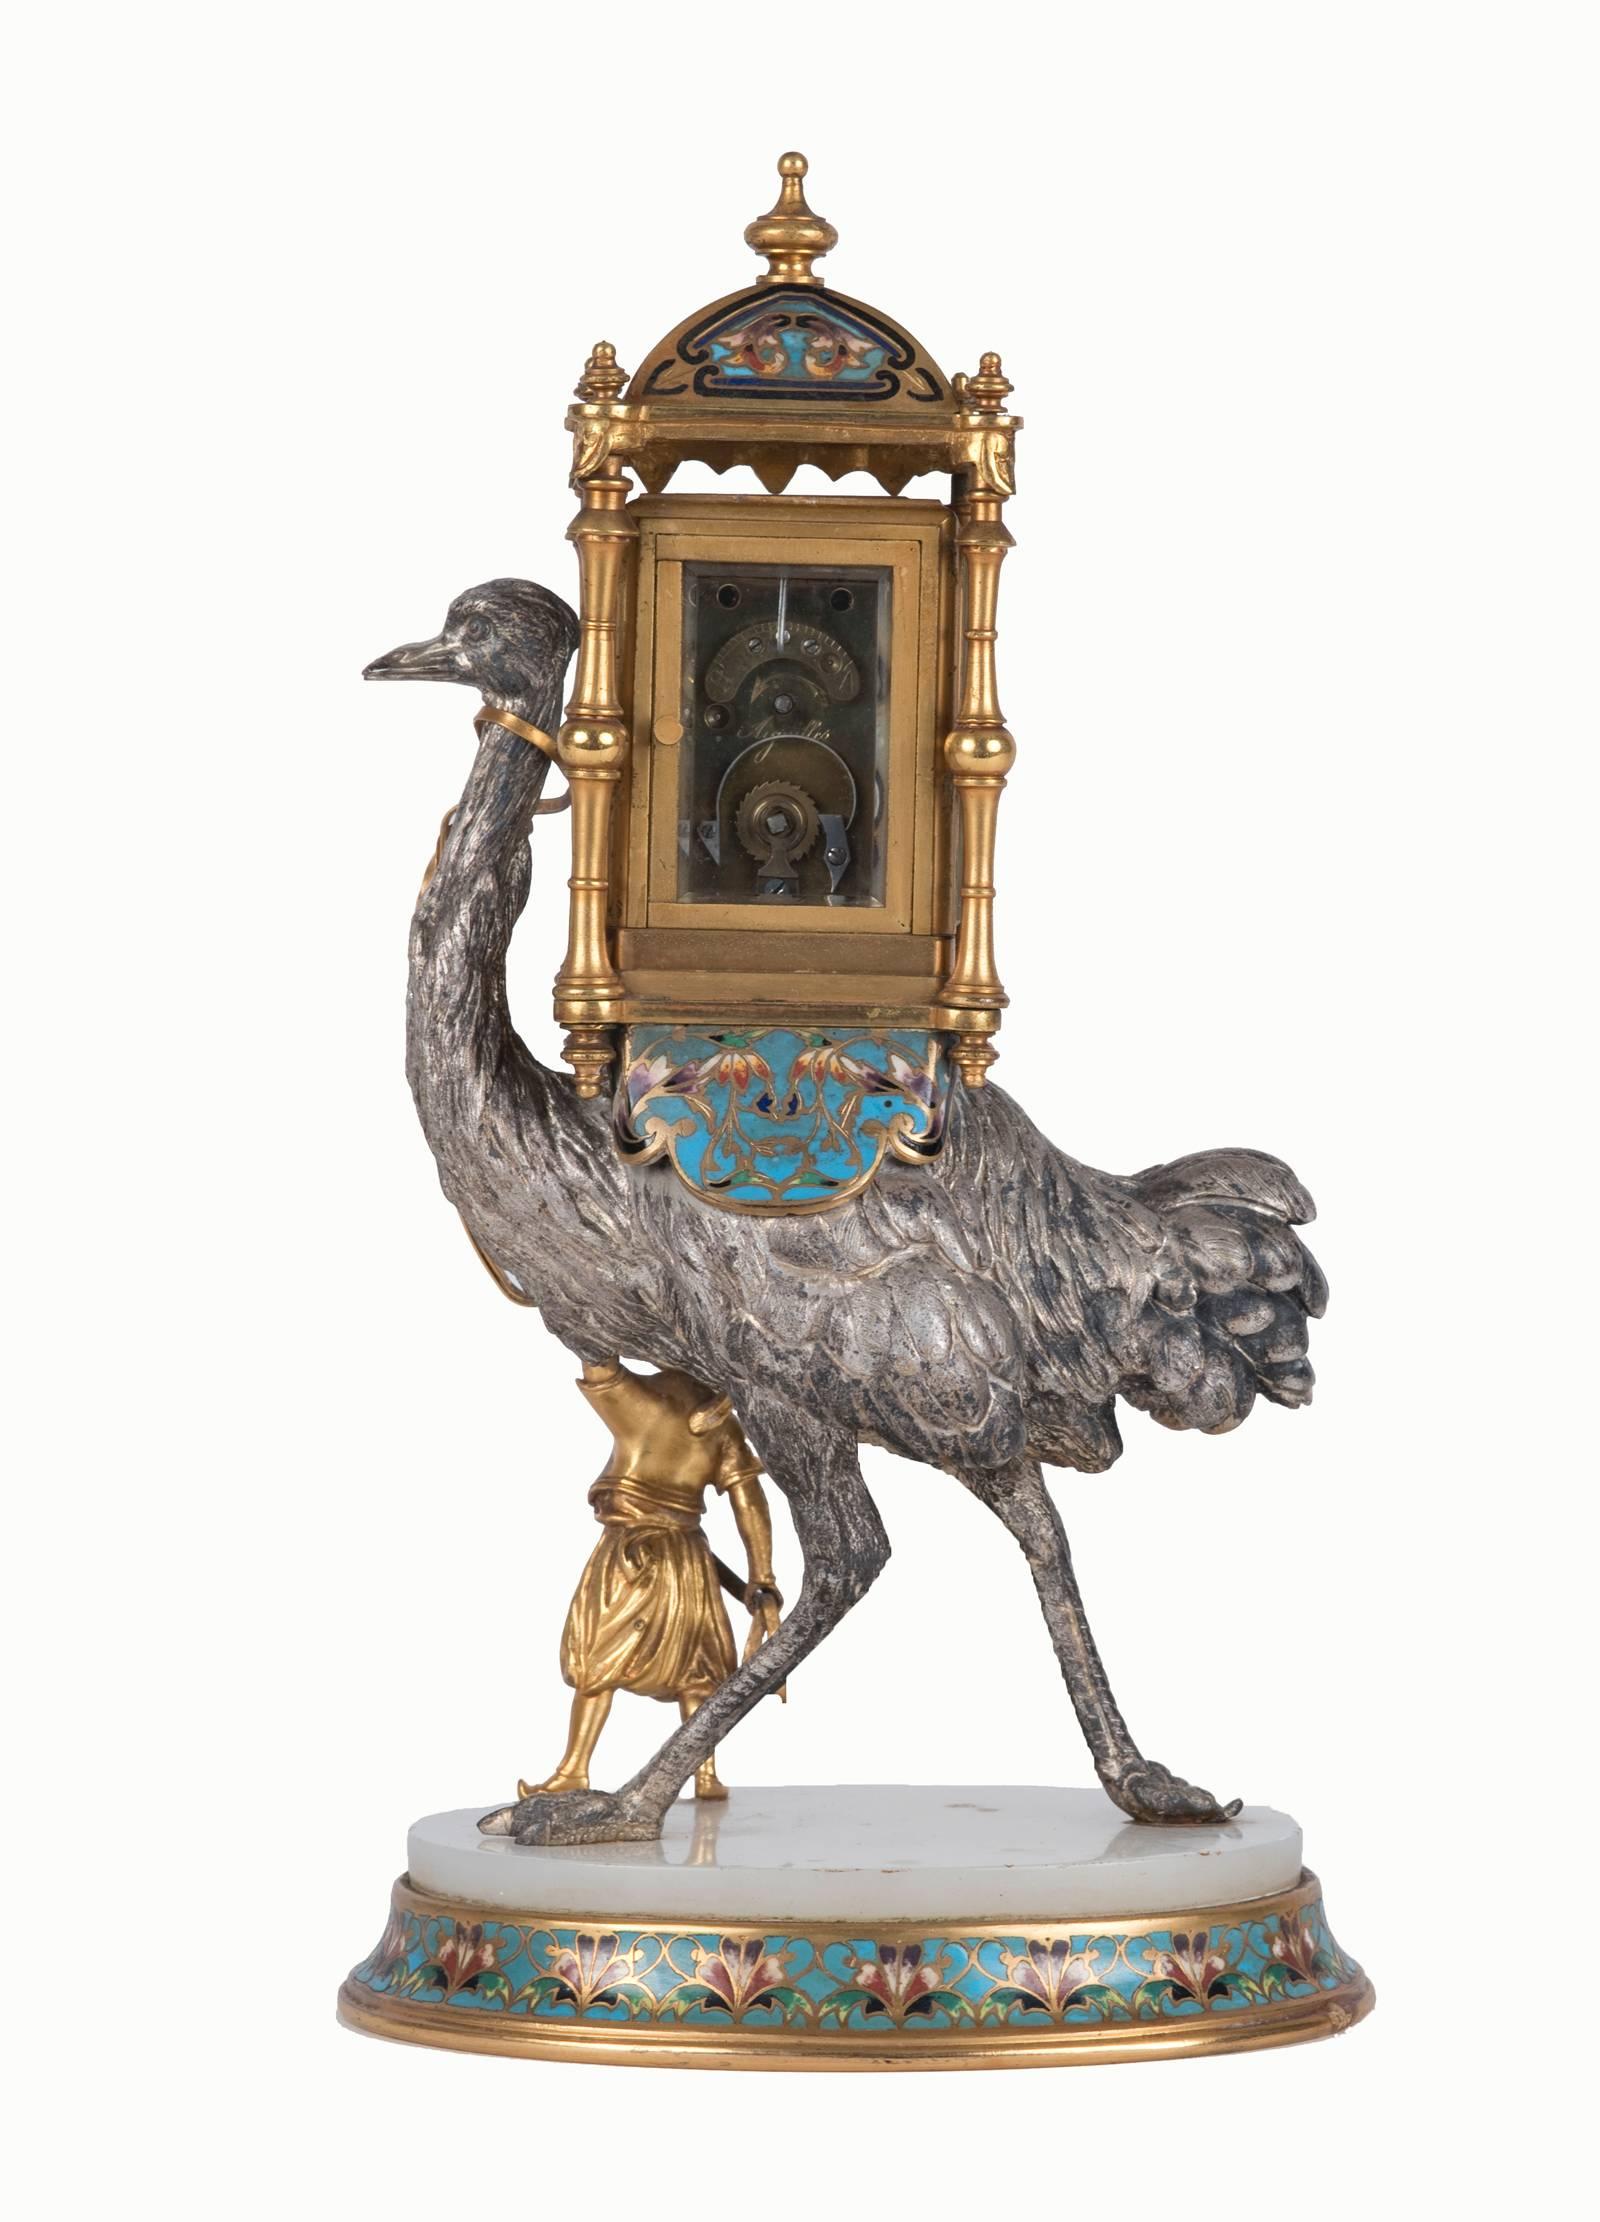 On an onyx and finely detailed cloisonné base, a Turkish man leads an oversized ostrich with an encased clock on its back. Through the beveled glass panels of the case, the clock face depicts the name of the Parisian manufacturer of this sculptural